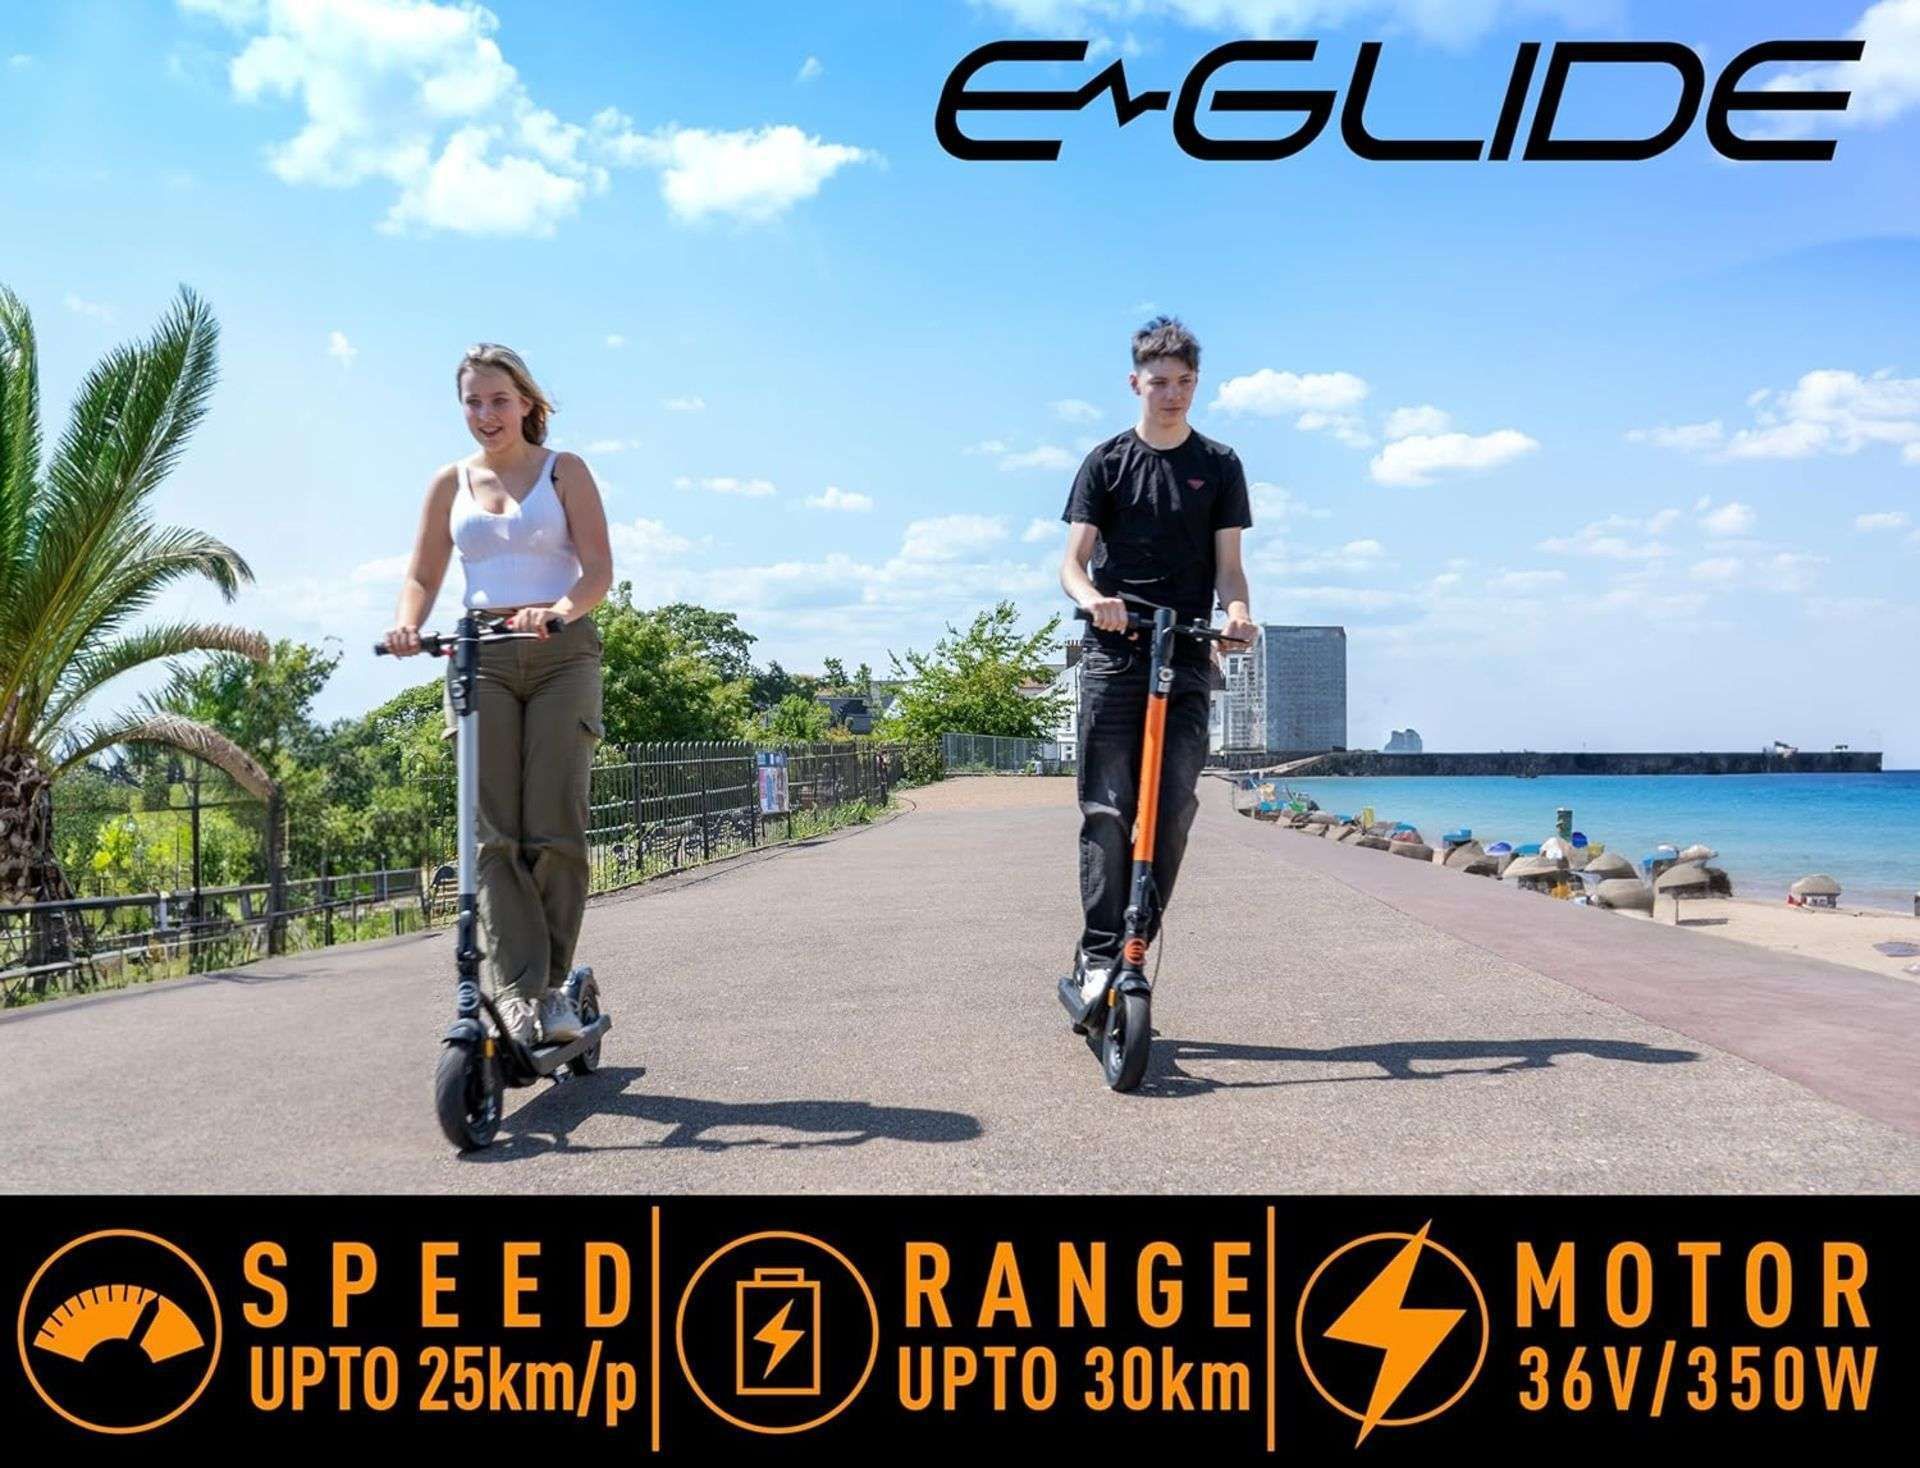 Brand New E-Glide V2 Electric Scooter Grey and Black RRP £599, Introducing a sleek and efficient - Image 3 of 5